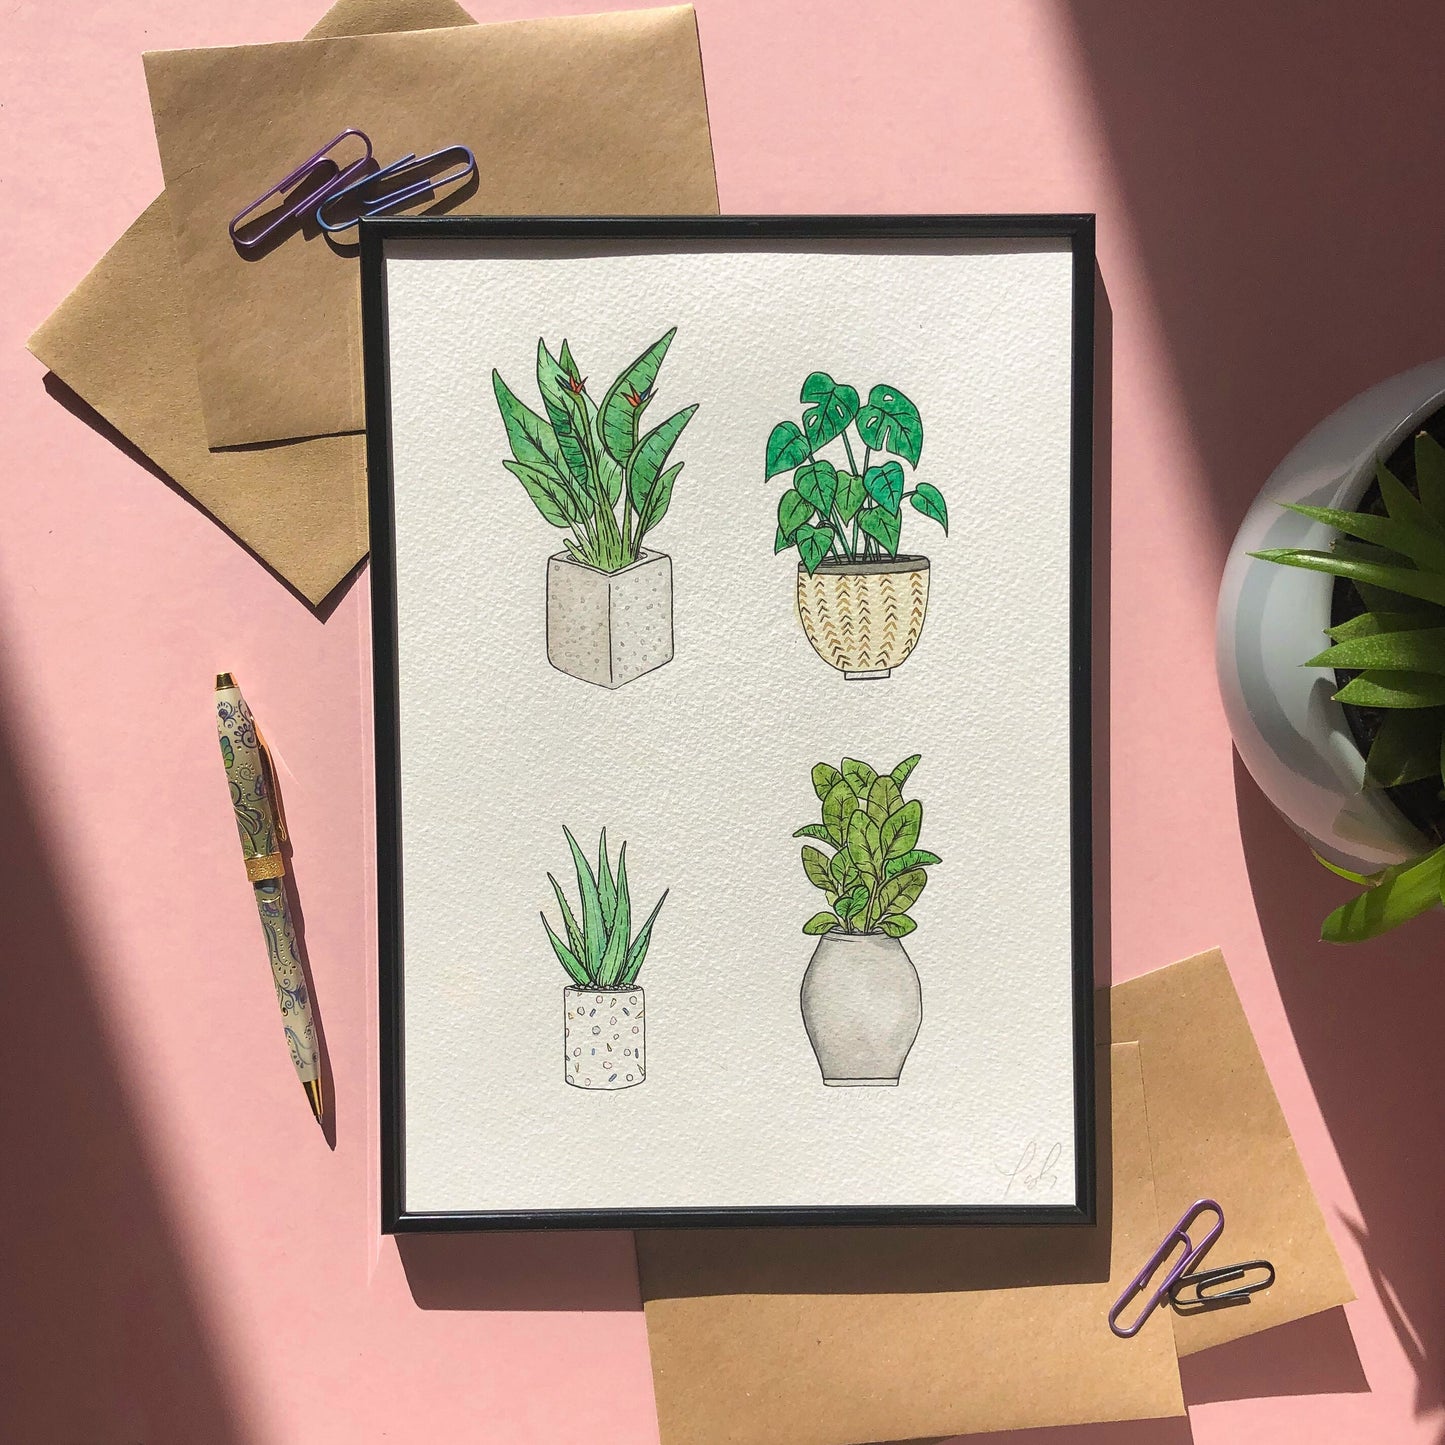 APrint, Notepad & House Plants Sticker Set - A4 Print A3, A6 Memo Pad - Eco Friendly Letterbox Gift for Plant Lover - Plant Stationery Set